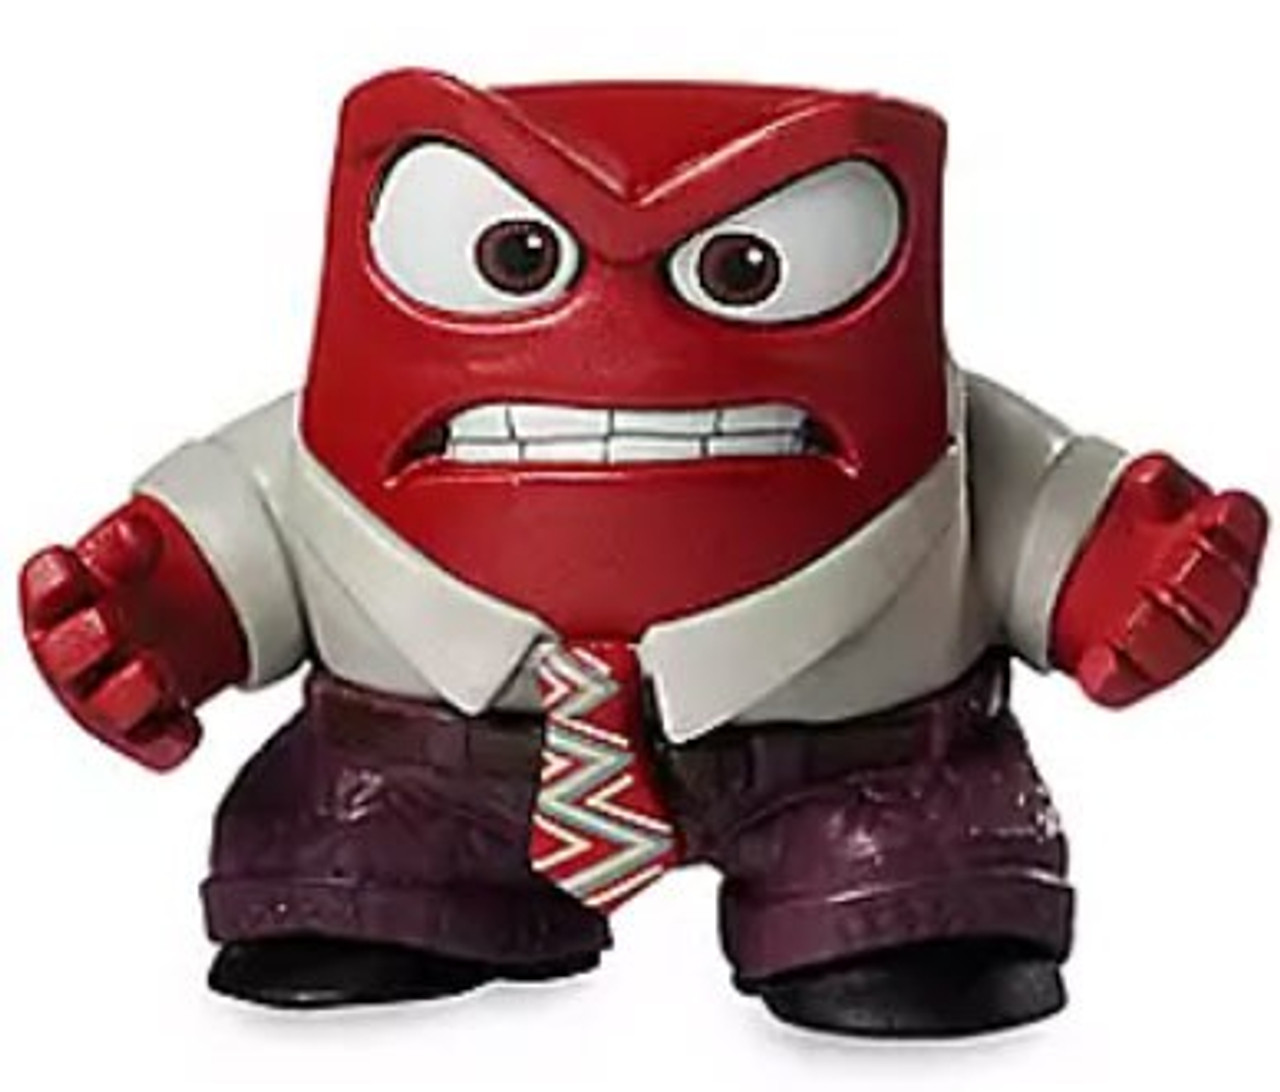 Disney Pixar Inside Out Anger Exclusive 3 Mini Pvc Figure Loose No Package Toywiz